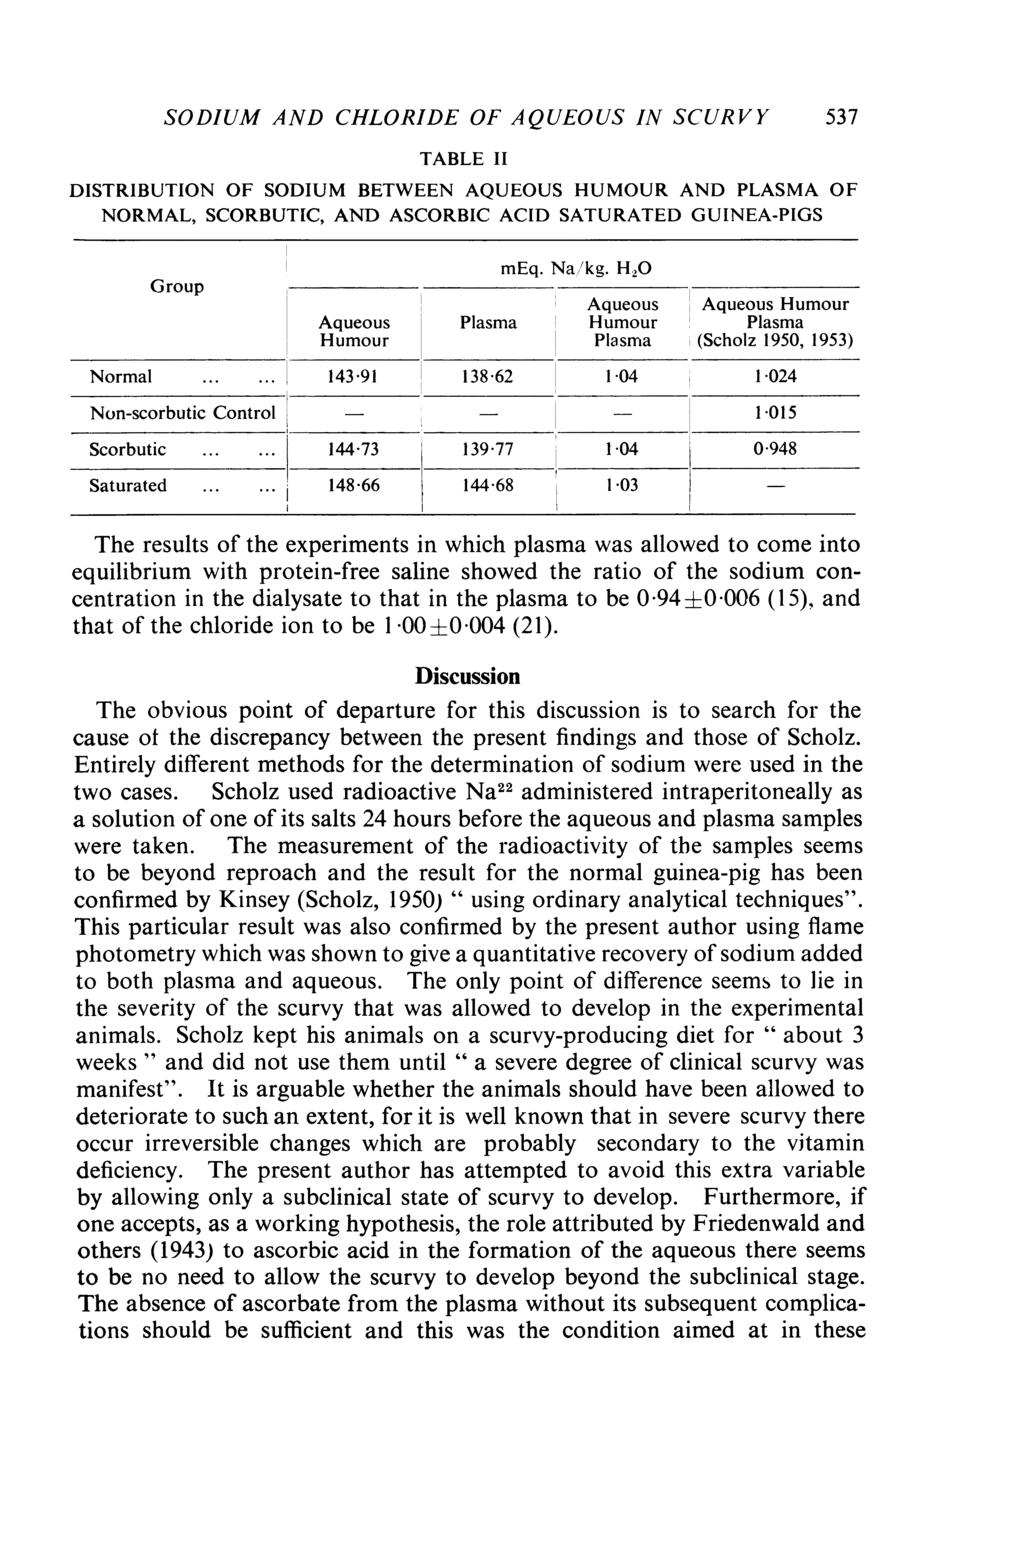 SODIUM AND CHLORIDE OF AQUEOUS IN SCURVY TABLE II DISTRIBUTION OF SODIUM BETWEEN AQUEOUS HUMOUR AND PLASMA OF NORMAL, SCORBUTIC, AND ASCORBIC ACID SATURATED GUINEA-PIGS Group meq. Na,'kg.